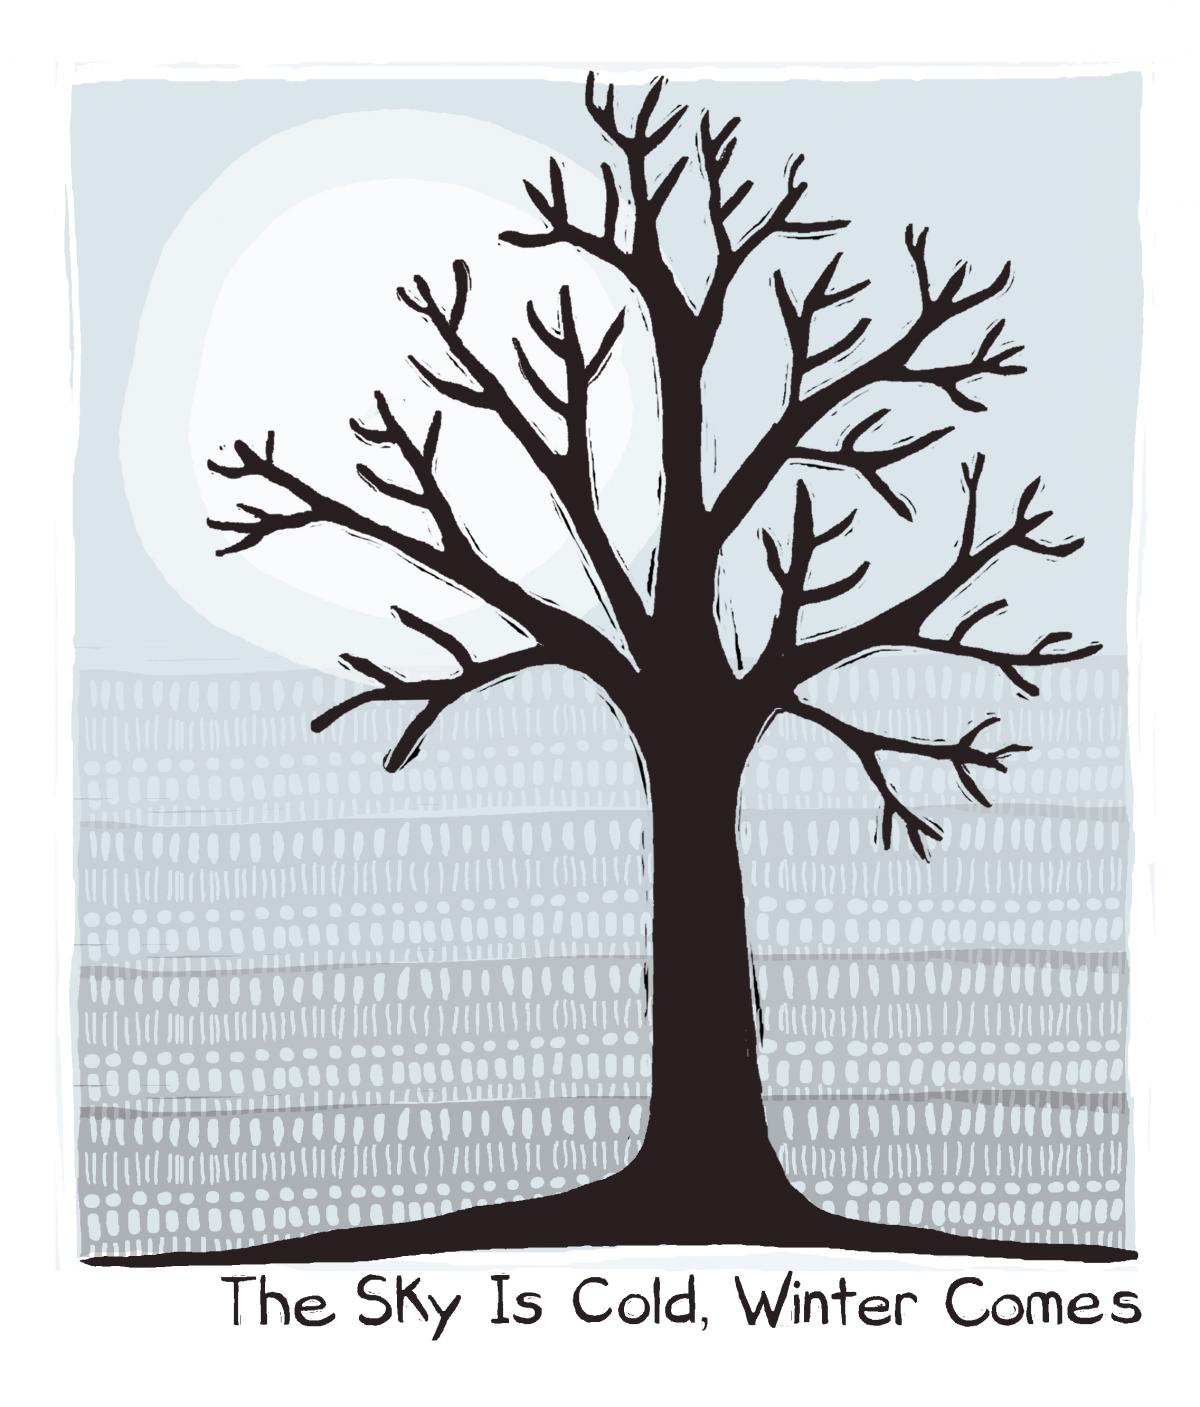 The Sky is Cold, Winter Comes - 72 Seasons Illustration